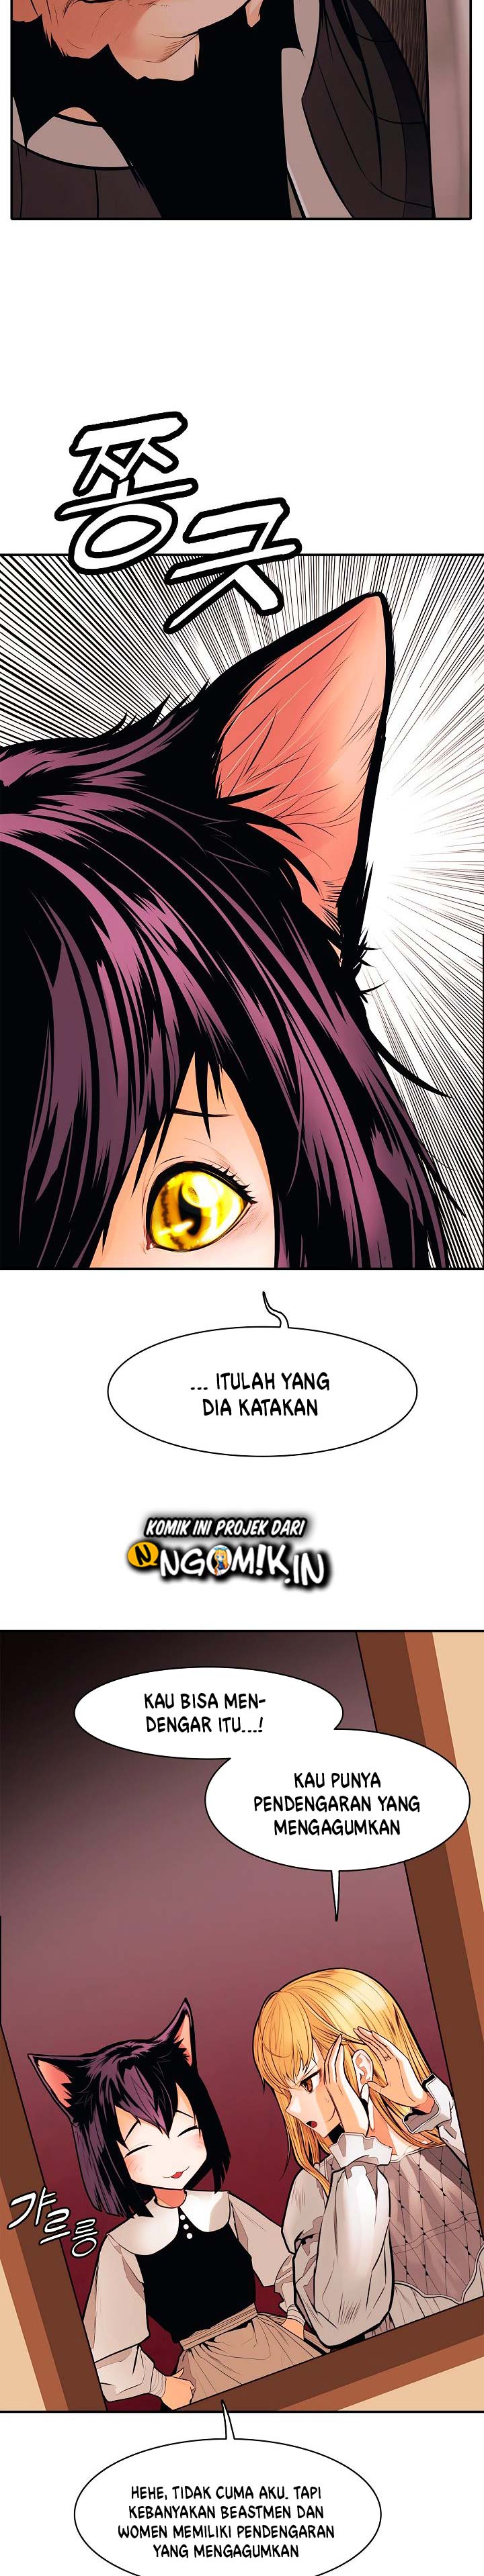 MookHyang – Dark Lady Chapter 44